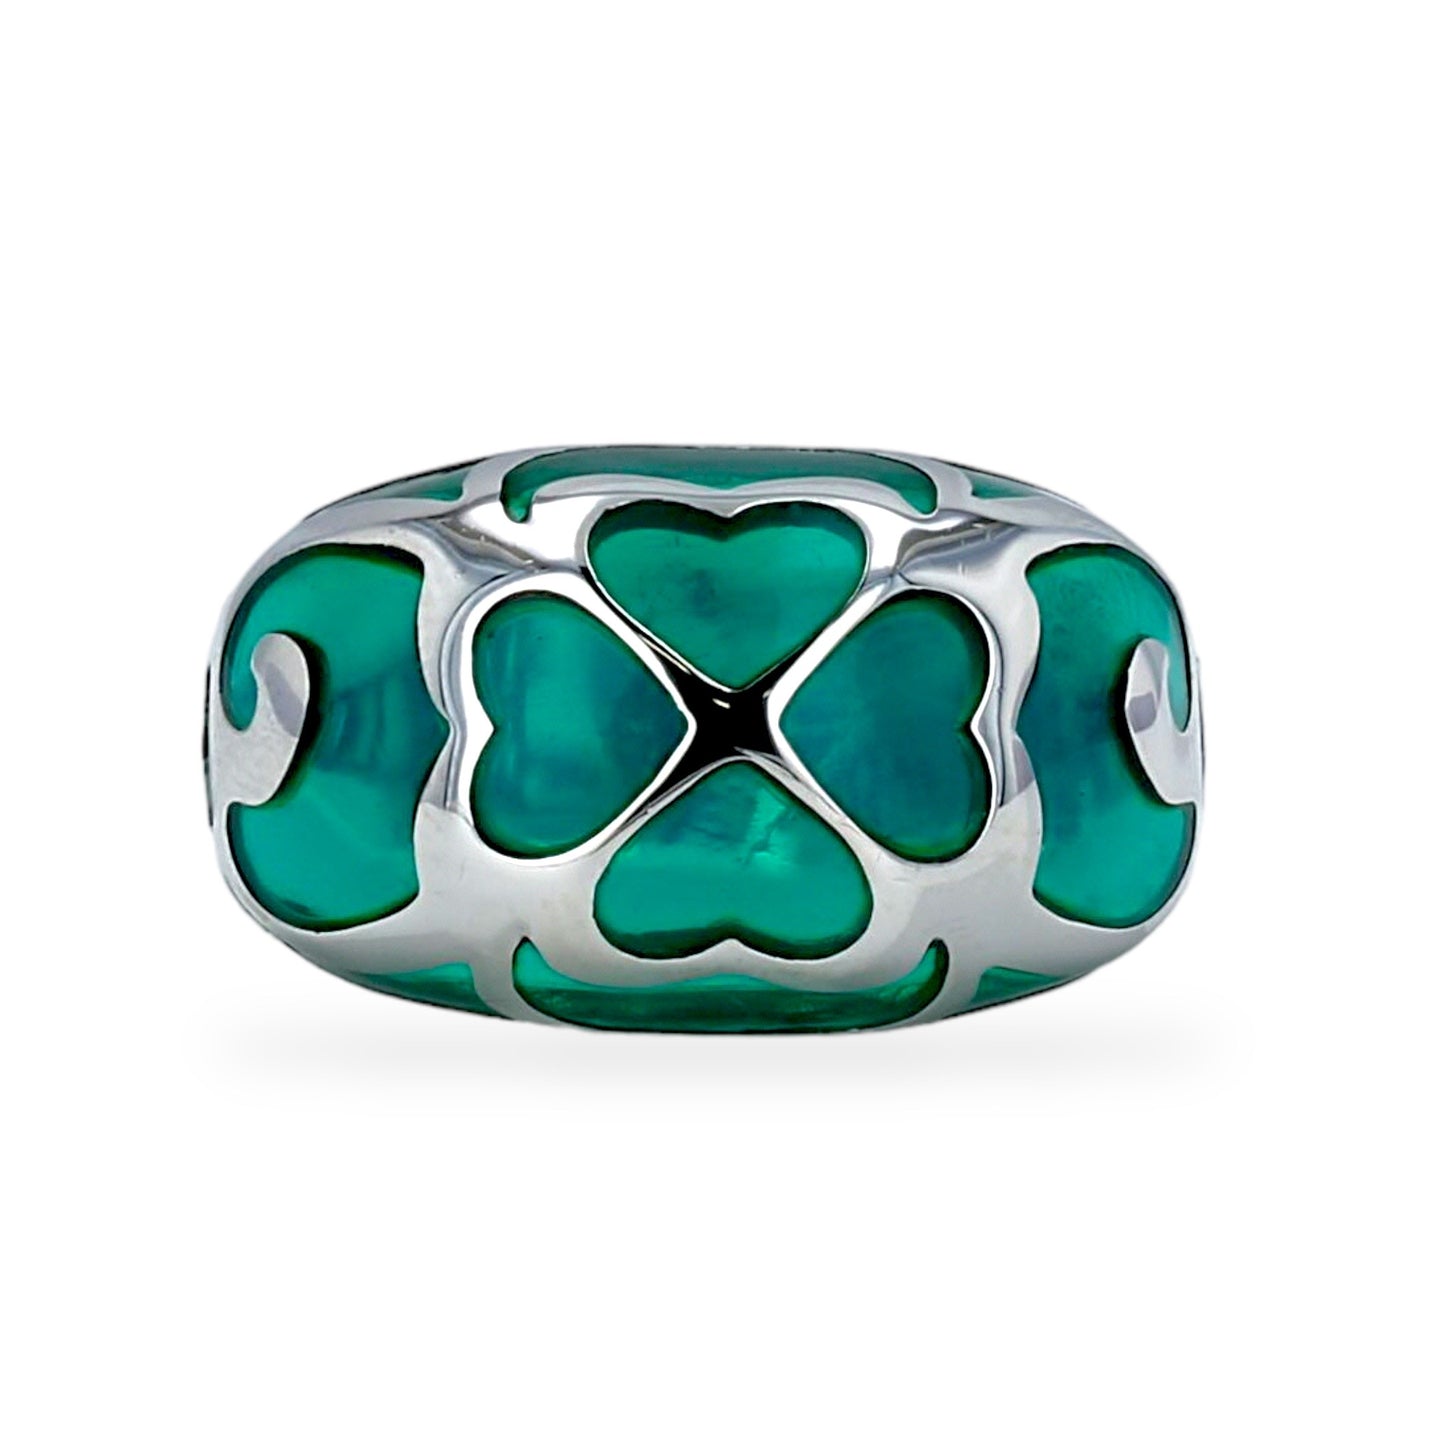 Luxury clover sterling silver 925 ring unique piece